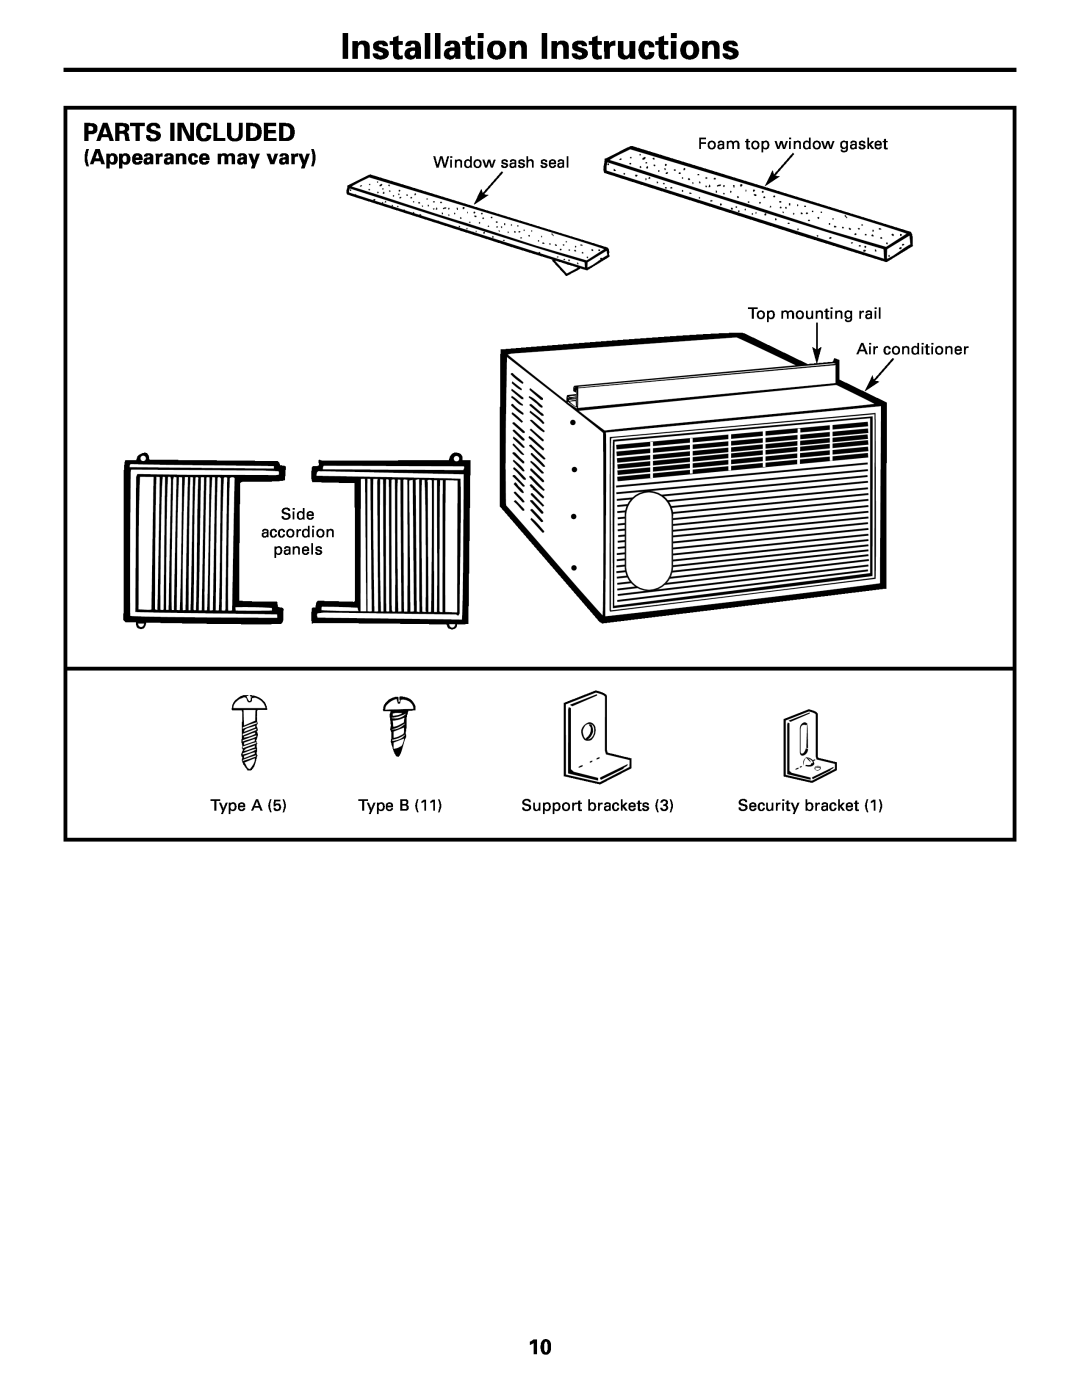 GE AGF05 operating instructions Installation Instructions, Parts Included, Appearance may vary 